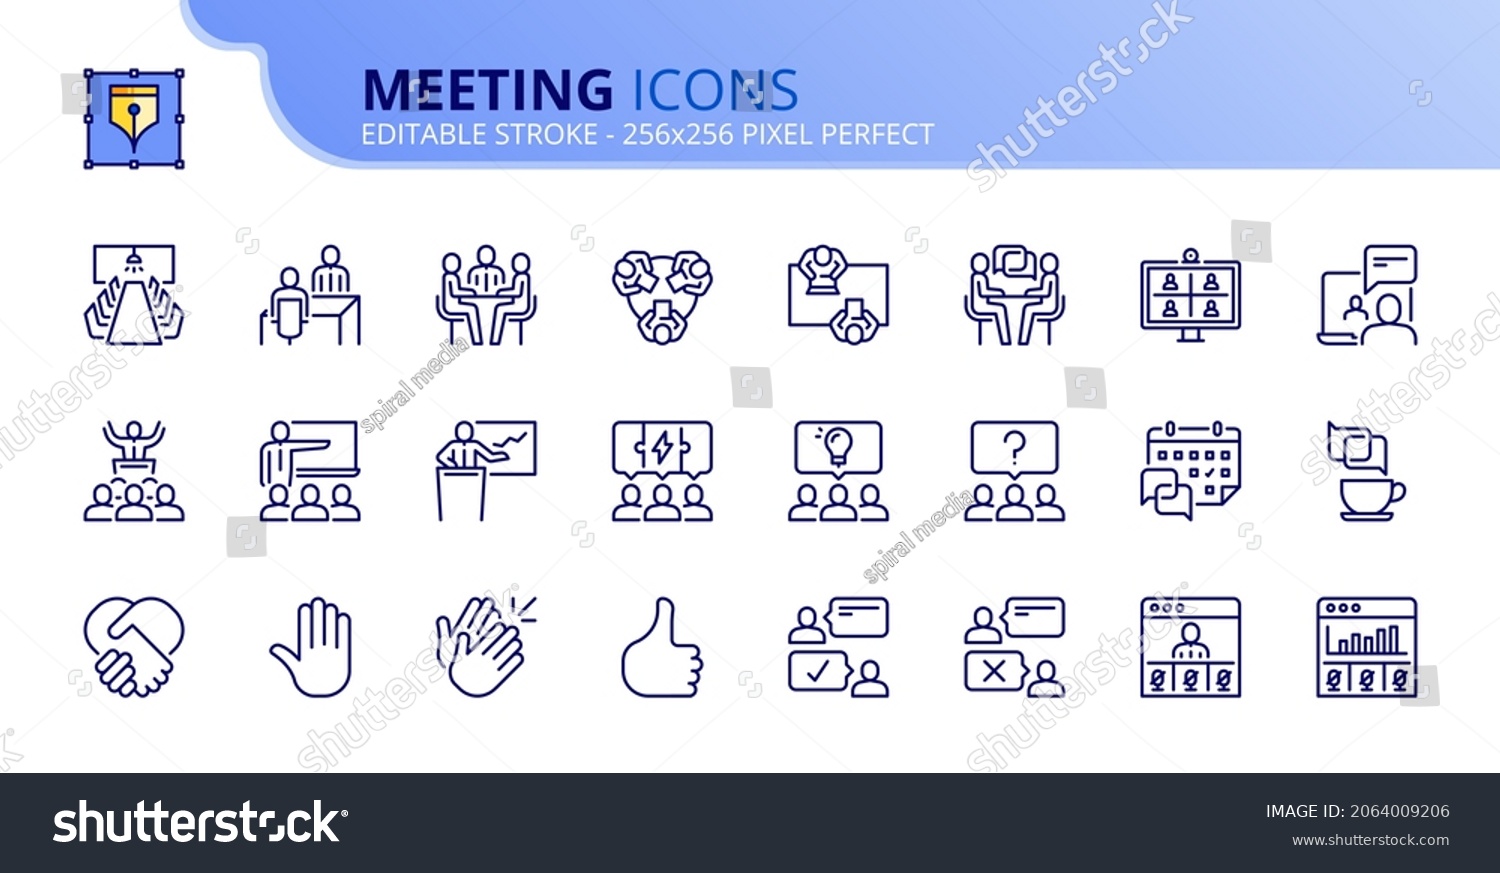 SVG of Outline icons about meeting. Business concept. Contains such icons as conference, interview, presentation, webinar, teamwork and coworking. Editable stroke Vector 256x256 pixel perfect svg